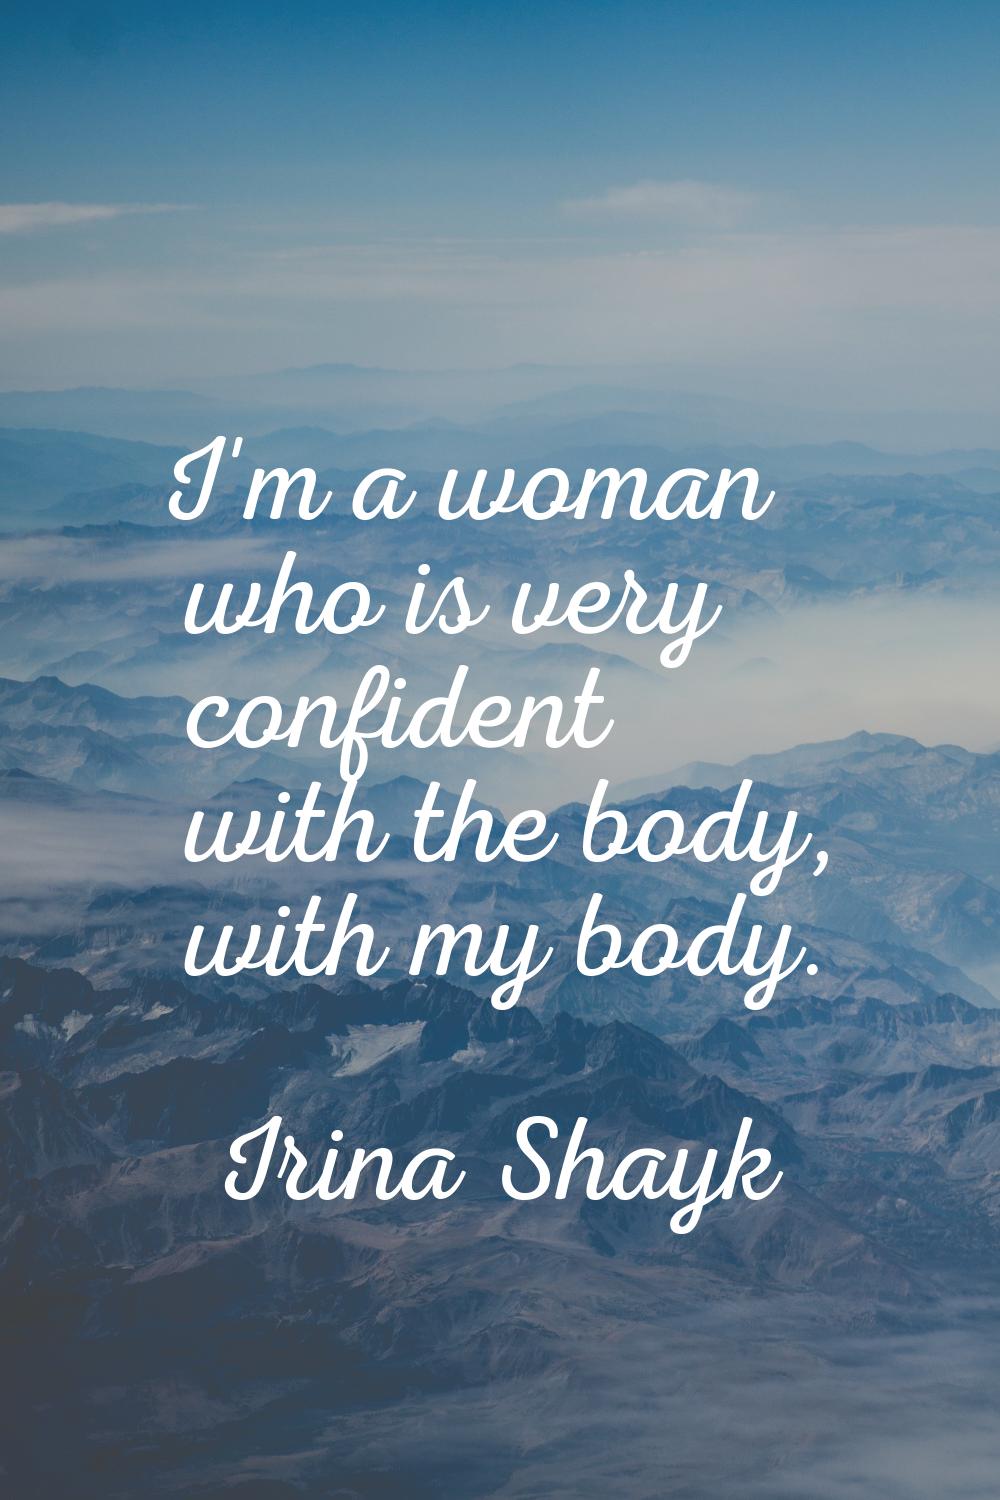 I'm a woman who is very confident with the body, with my body.